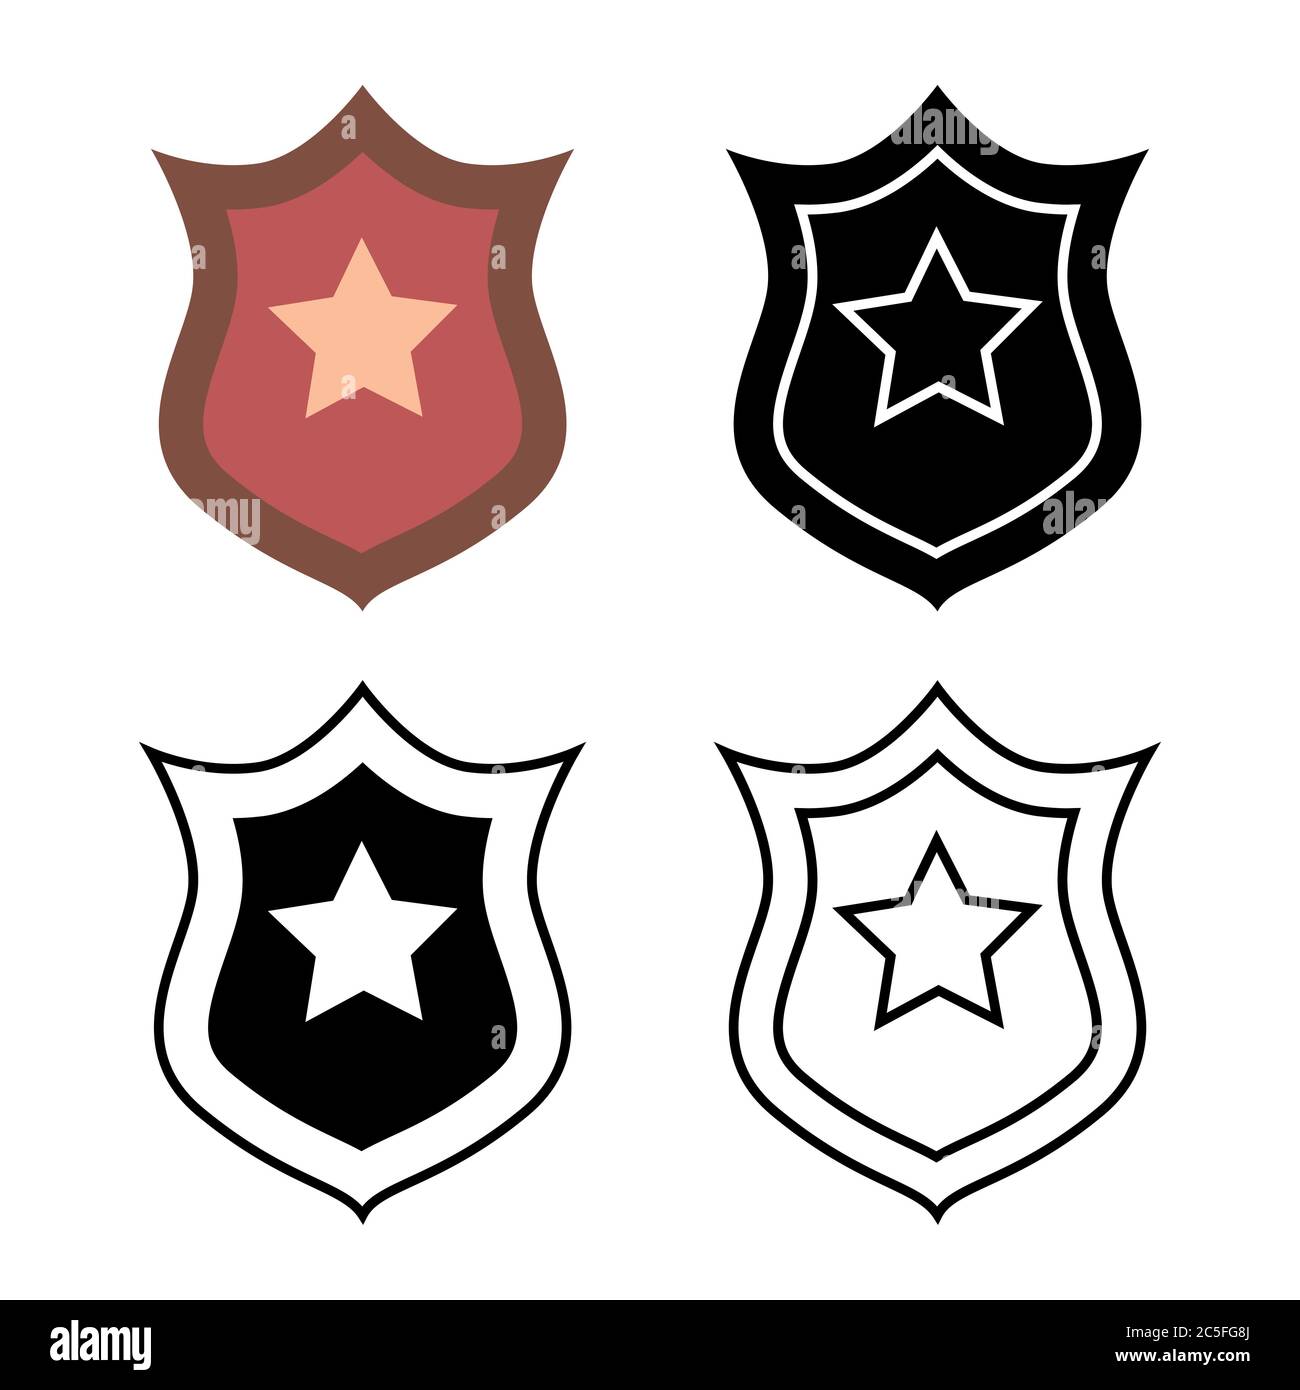 Policeman badge set. Emblem of a human rights defender, police officer. Trendy flat style for graphic design, web-site. Stock Vector illustration. Stock Vector